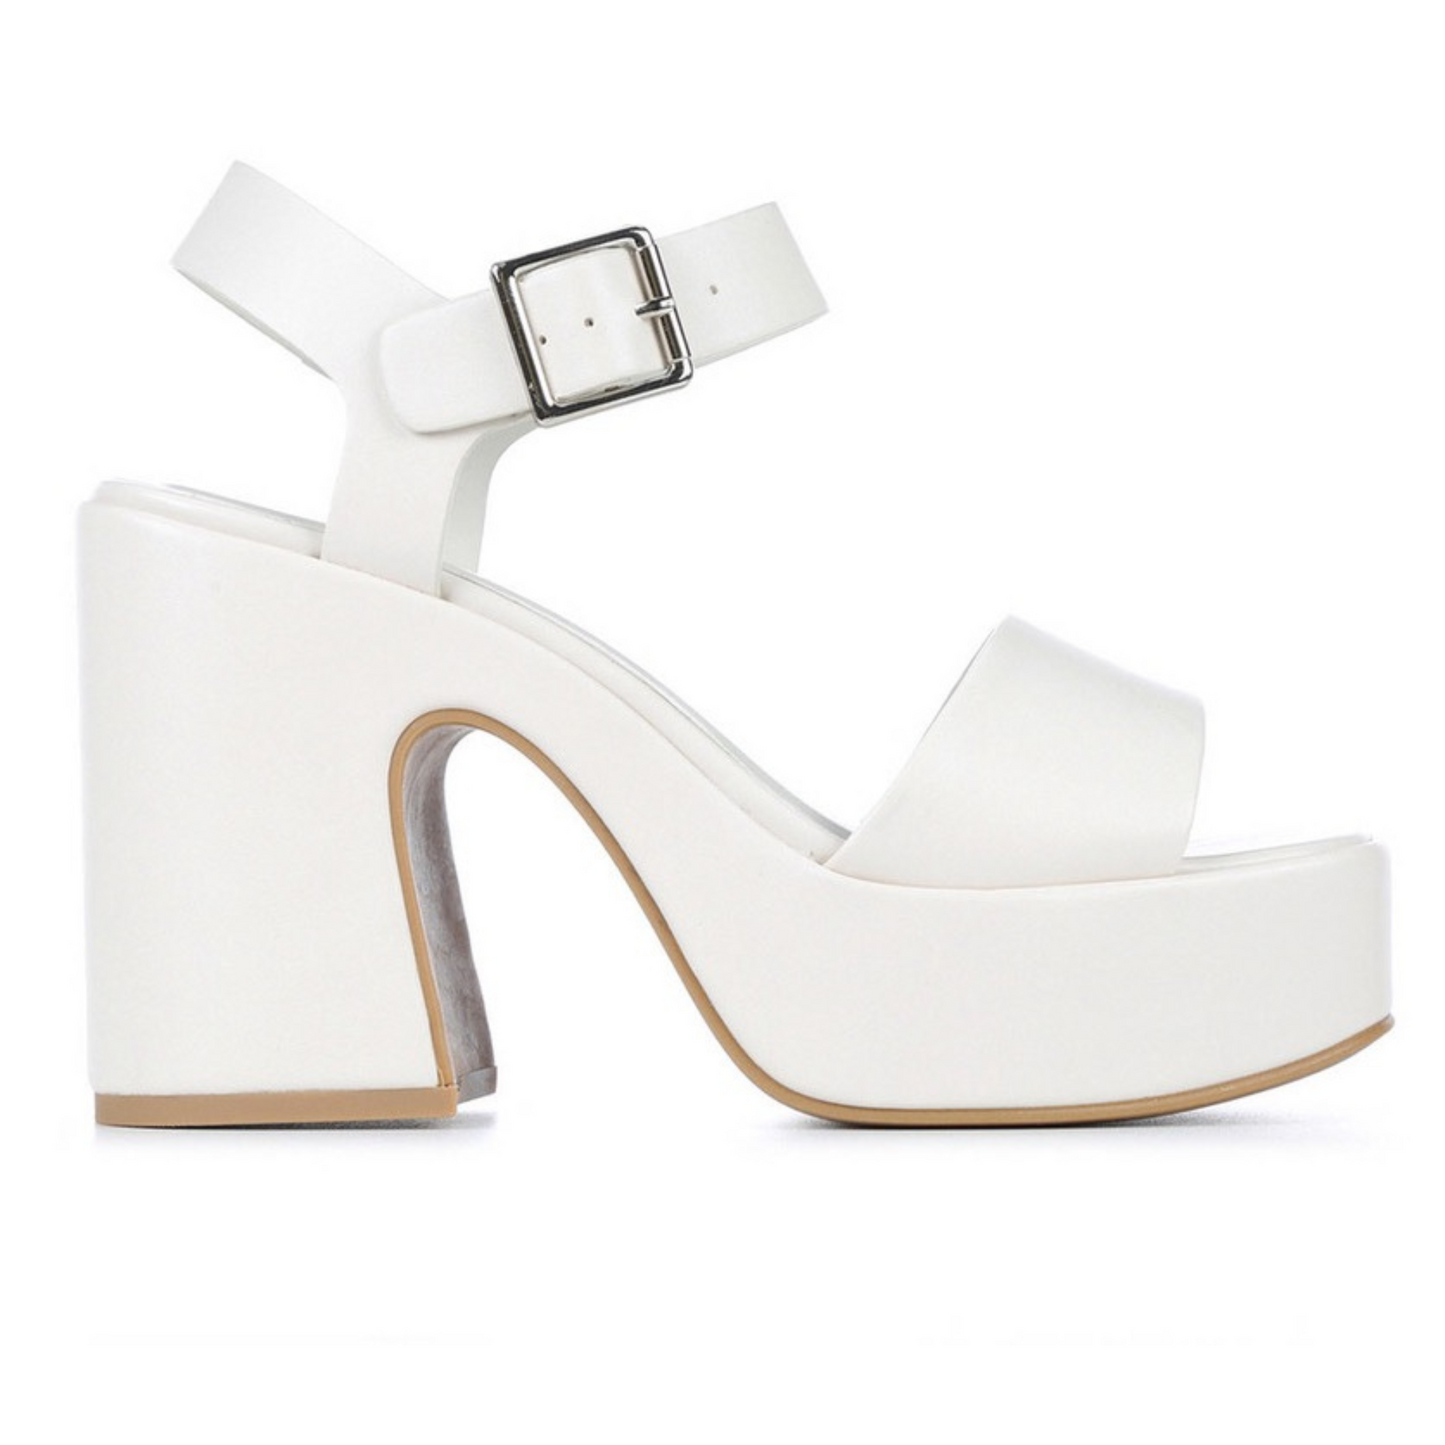 off white strappy wedge heel from Soda